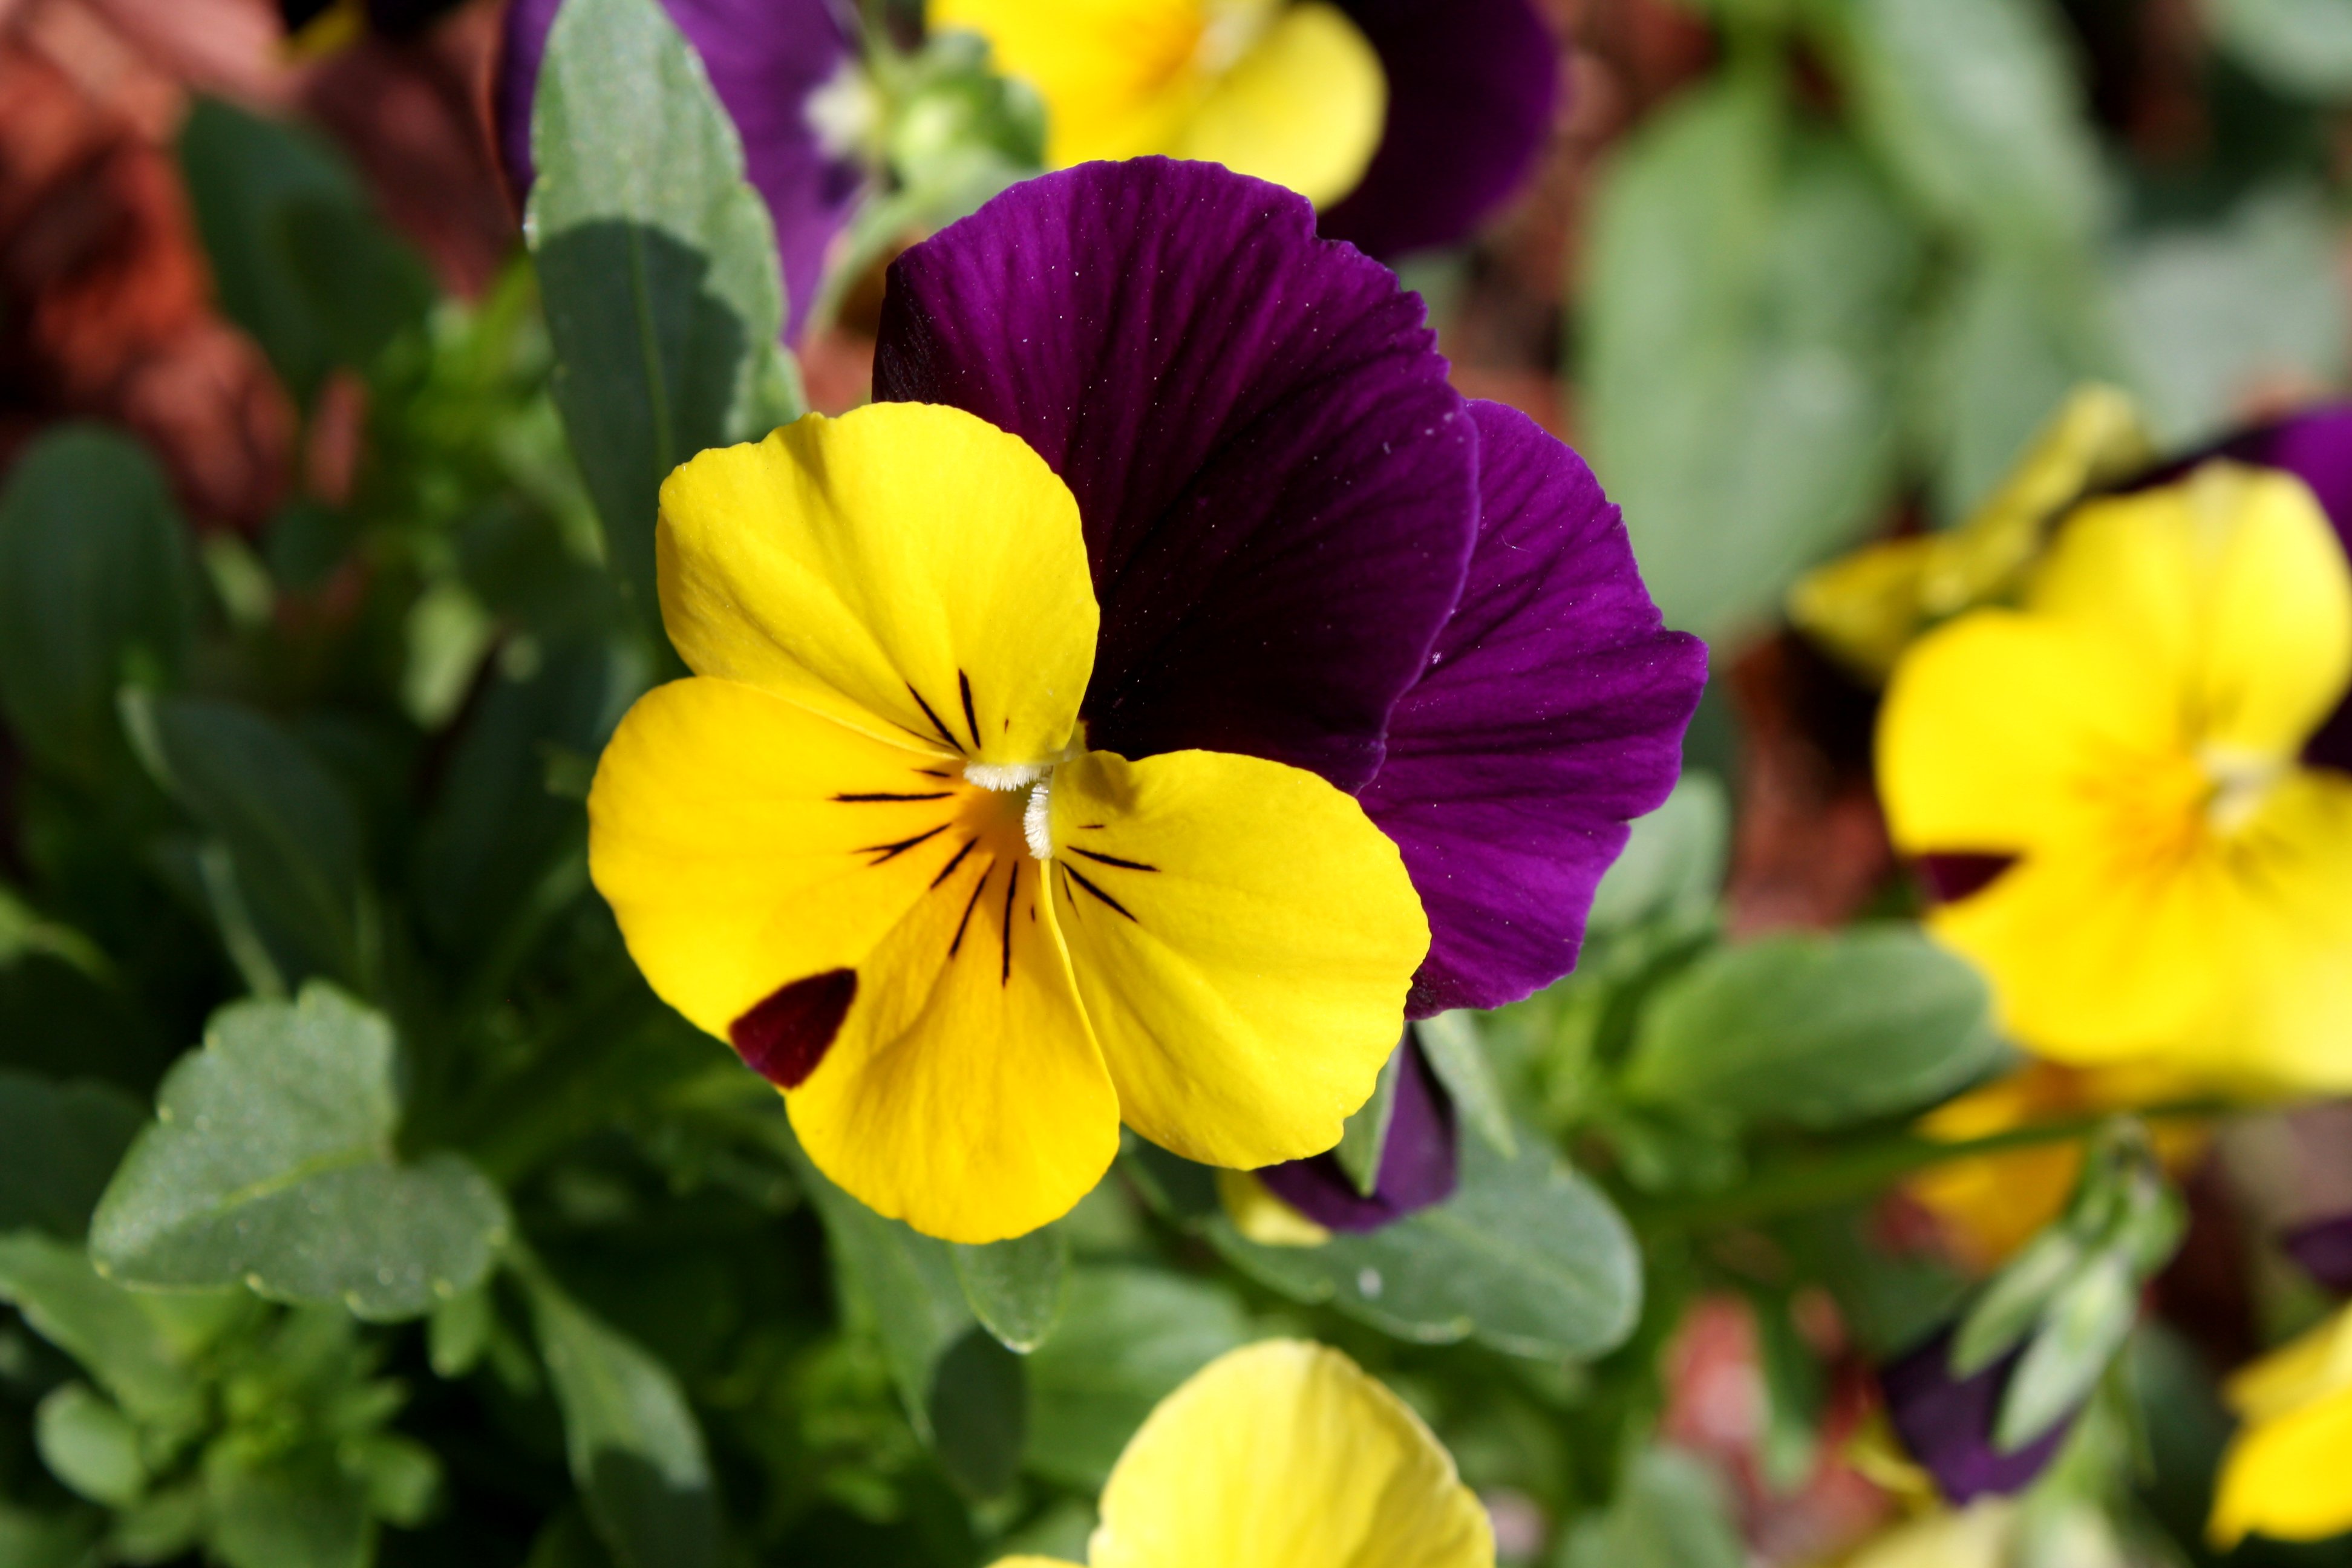 File:Viola tricolor pansy flower close up.jpg - Wikimedia Commons